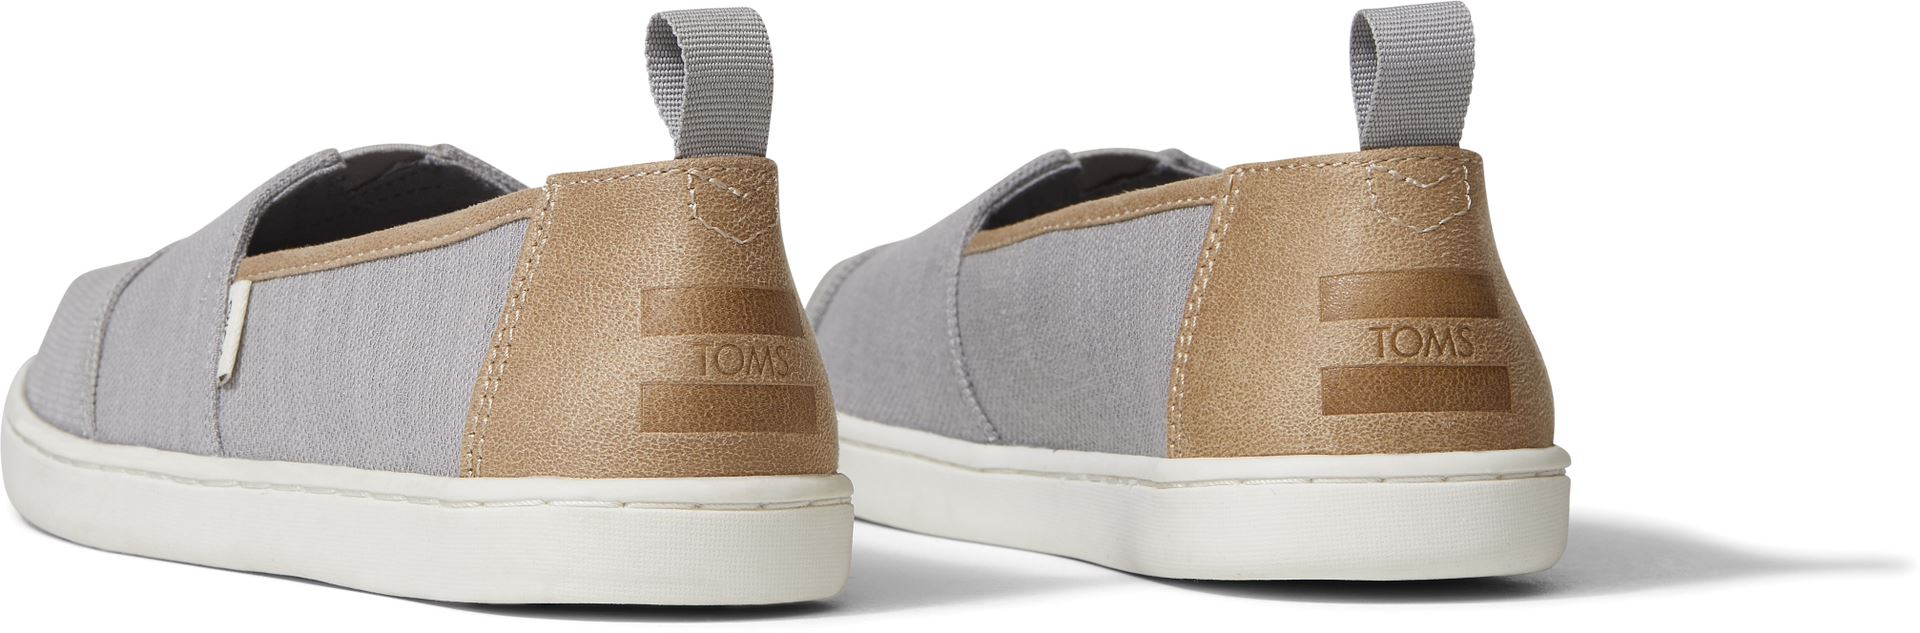 A unisex canvas shoe by TOMS, style Alpargata, a slip on in Grey and Tan. Back view of a pair.